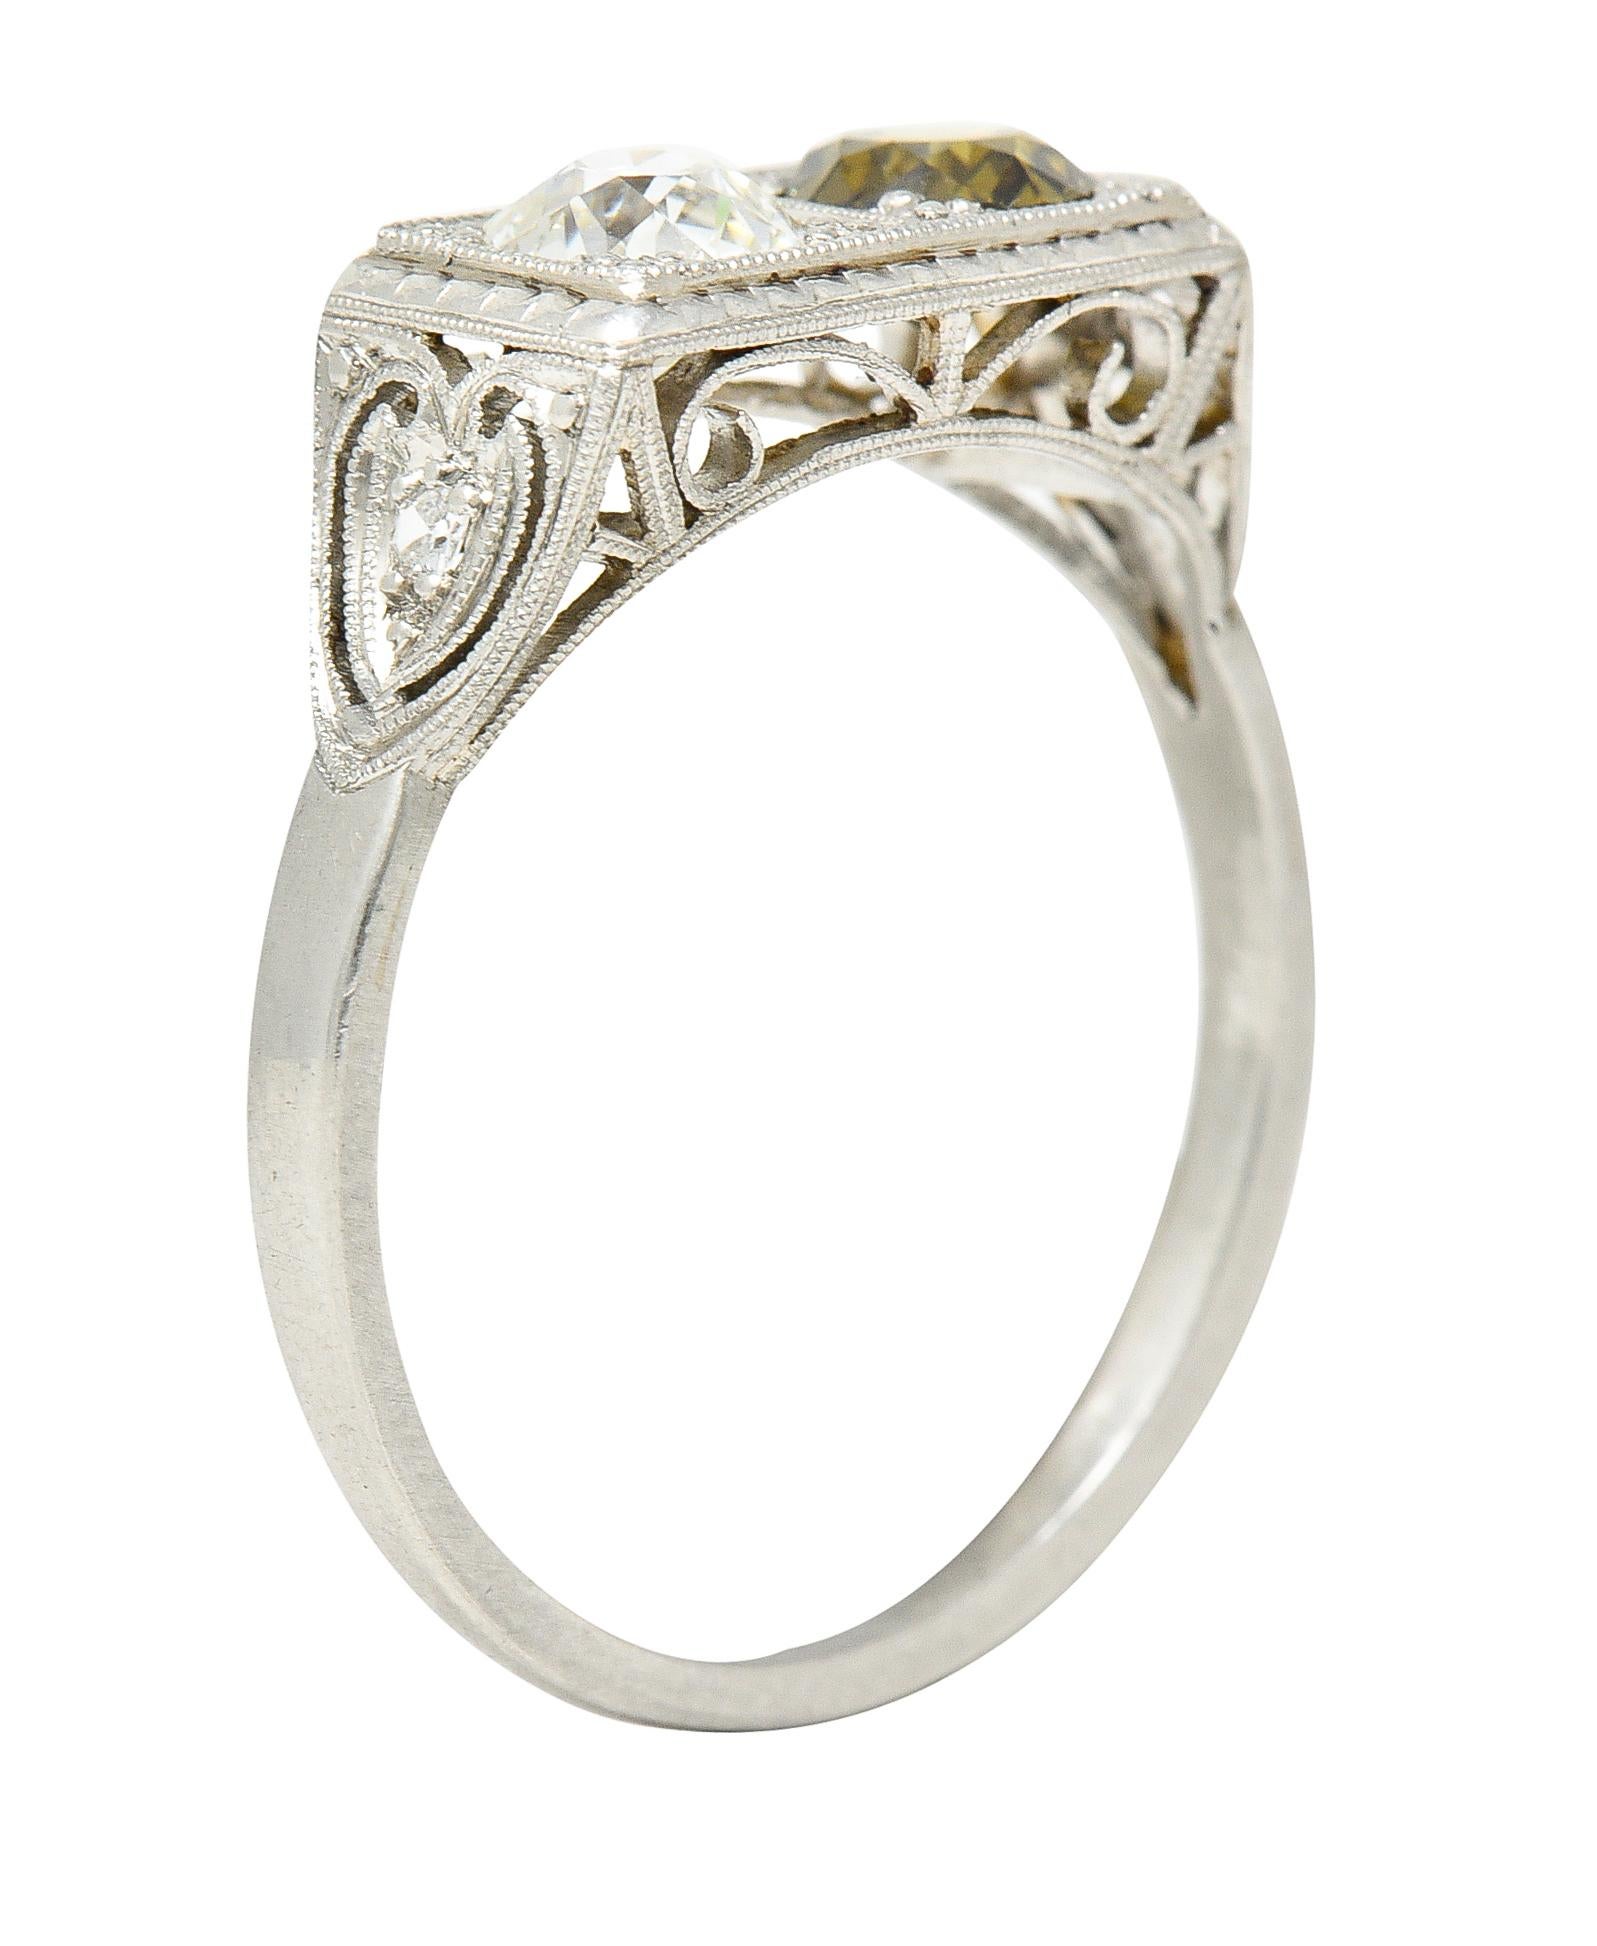 East to West rectangular mounting featuring two old European cut diamonds. In the Toi et Moi style - French to mean 